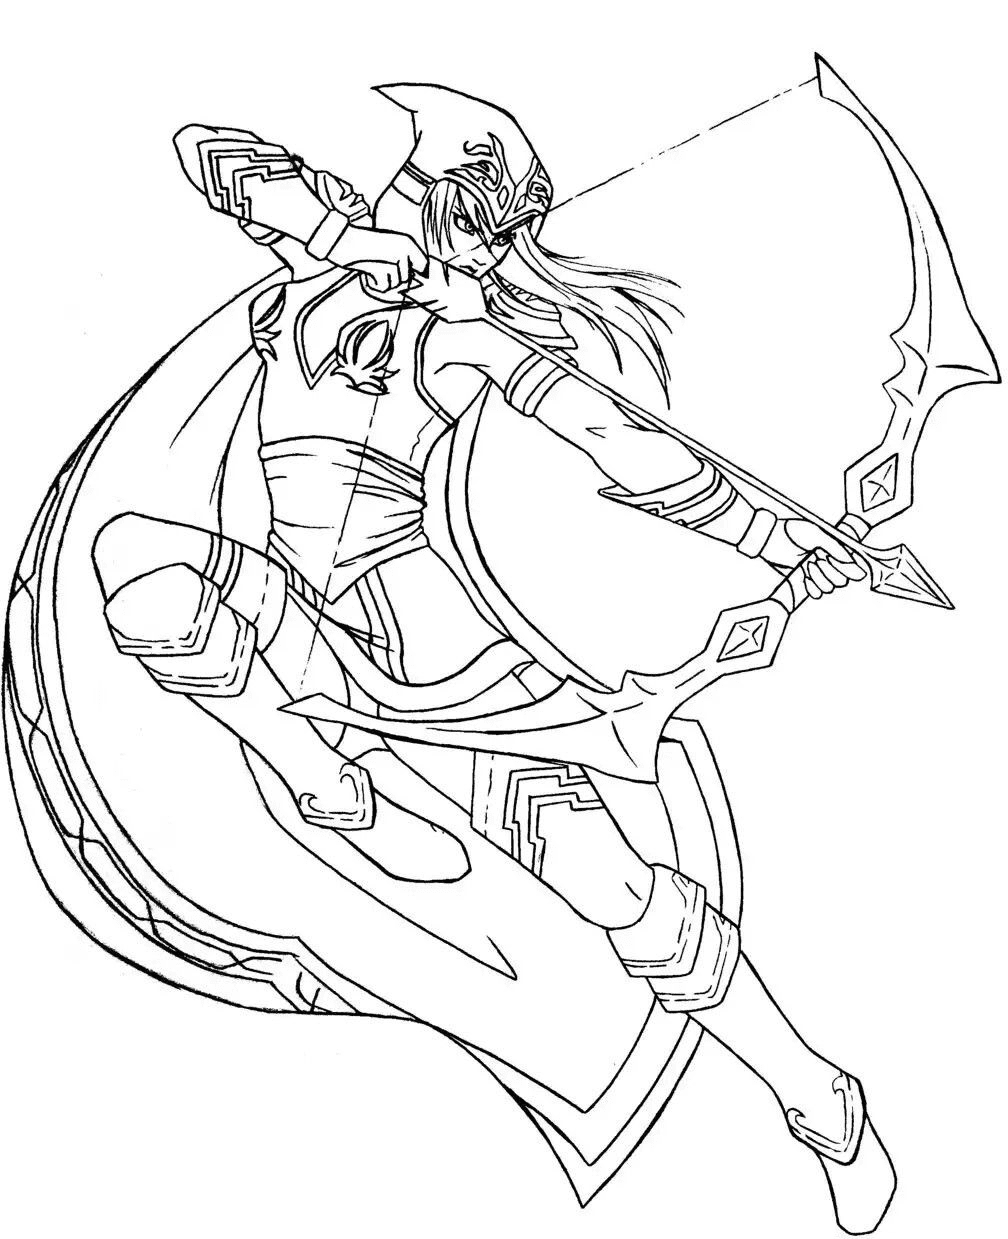 Ashe Coloring Page